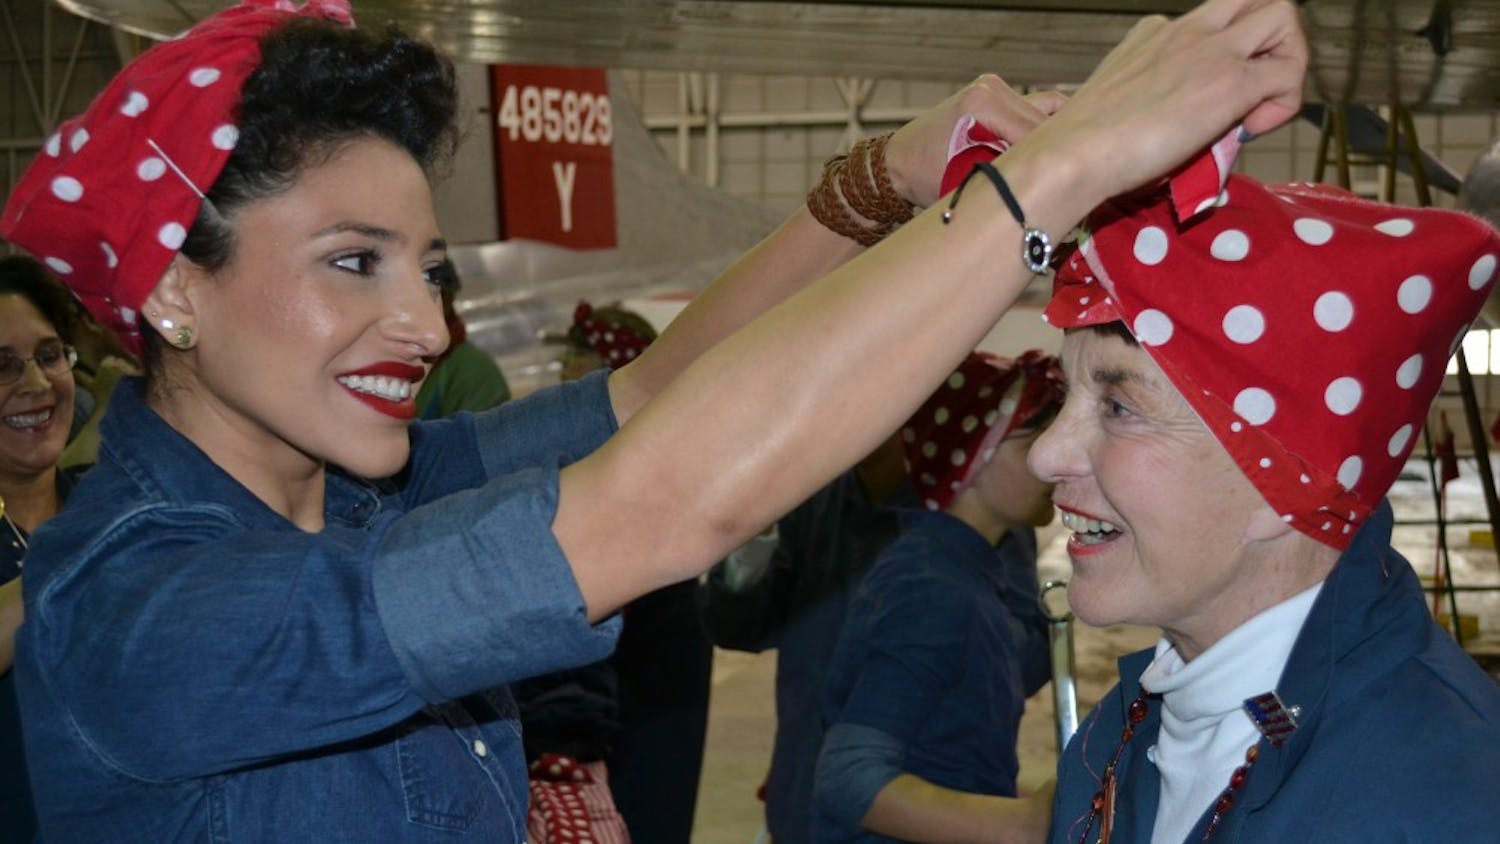 Rosie The Riveter attempts Guinness World Record